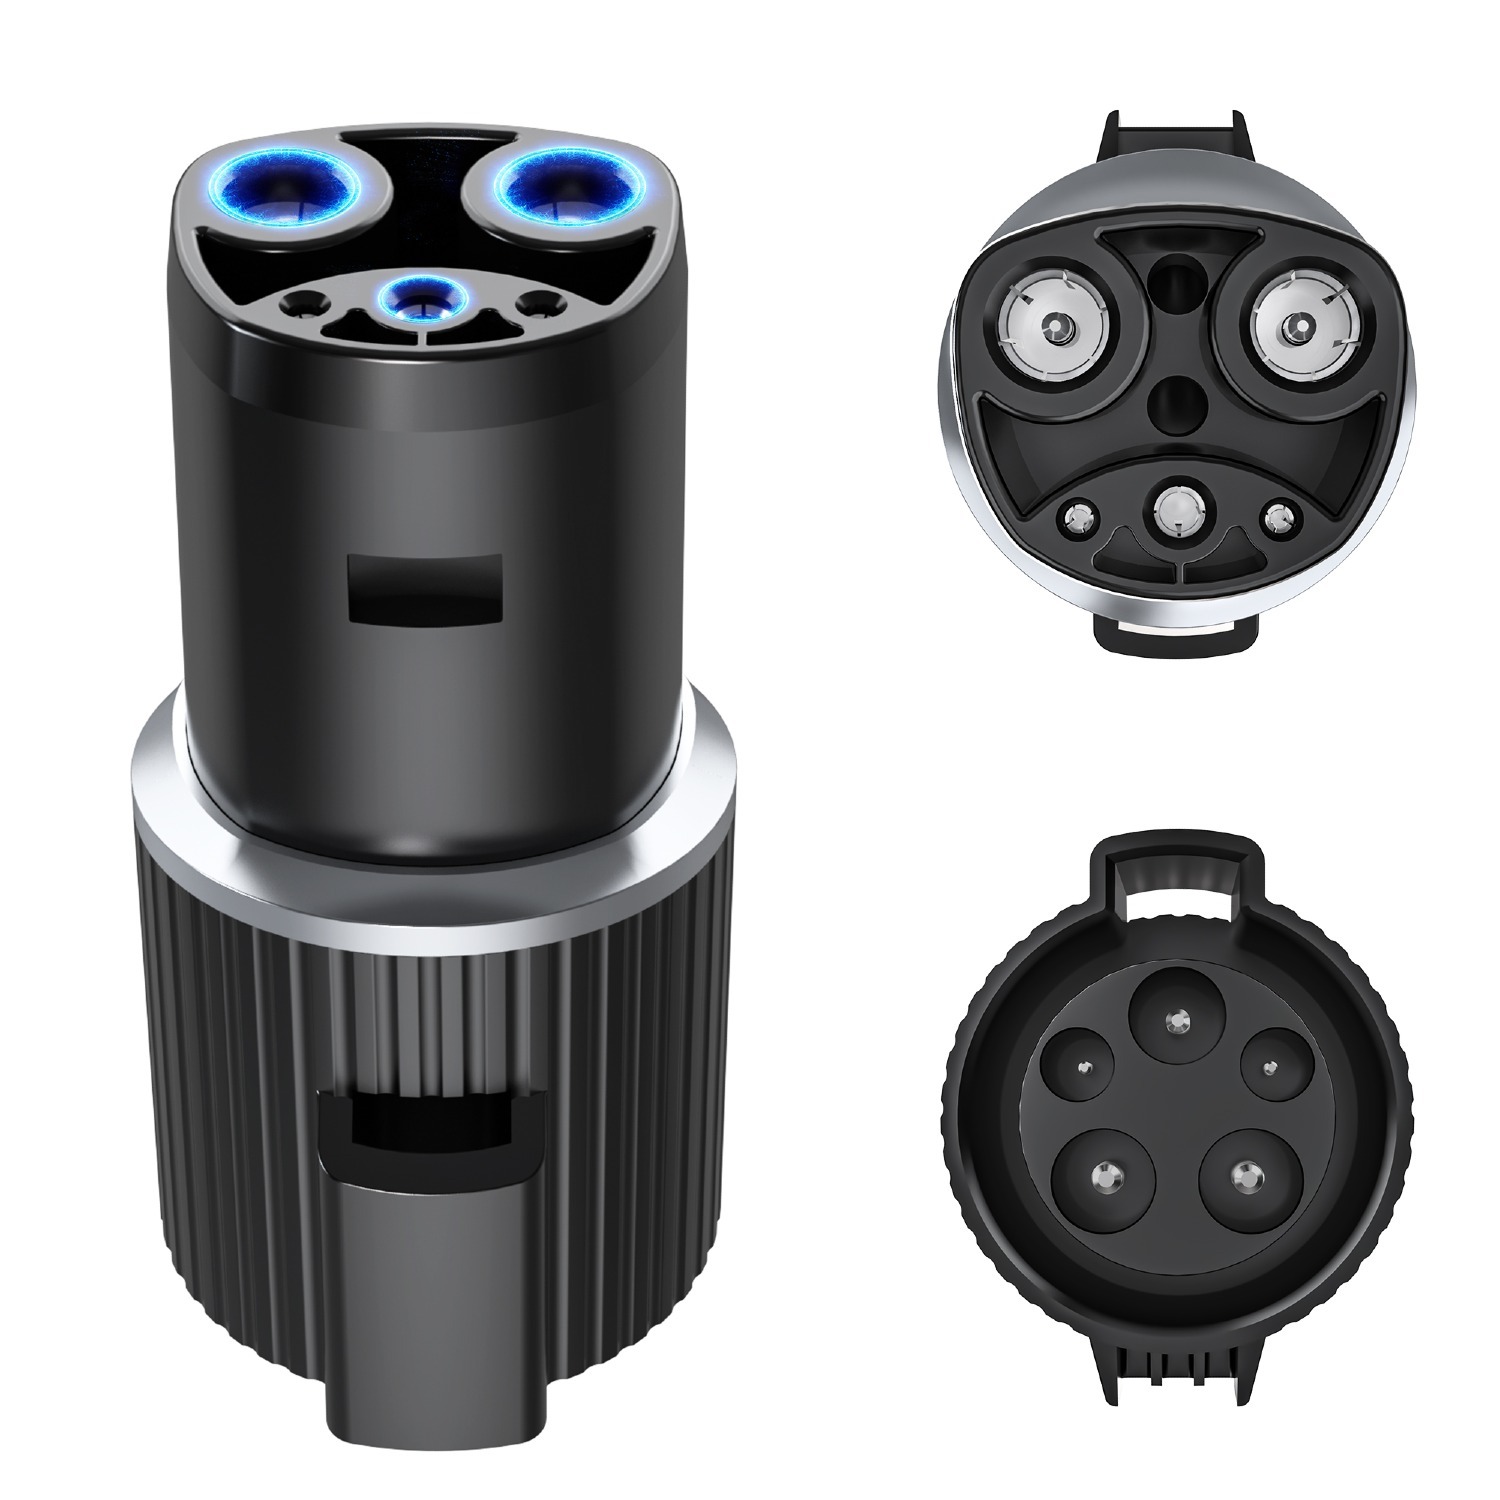 AVAPOW J1772 to Tesla Charging Adapter (Max 80A/240V AC) $9 + Free Shipping on orders $35+